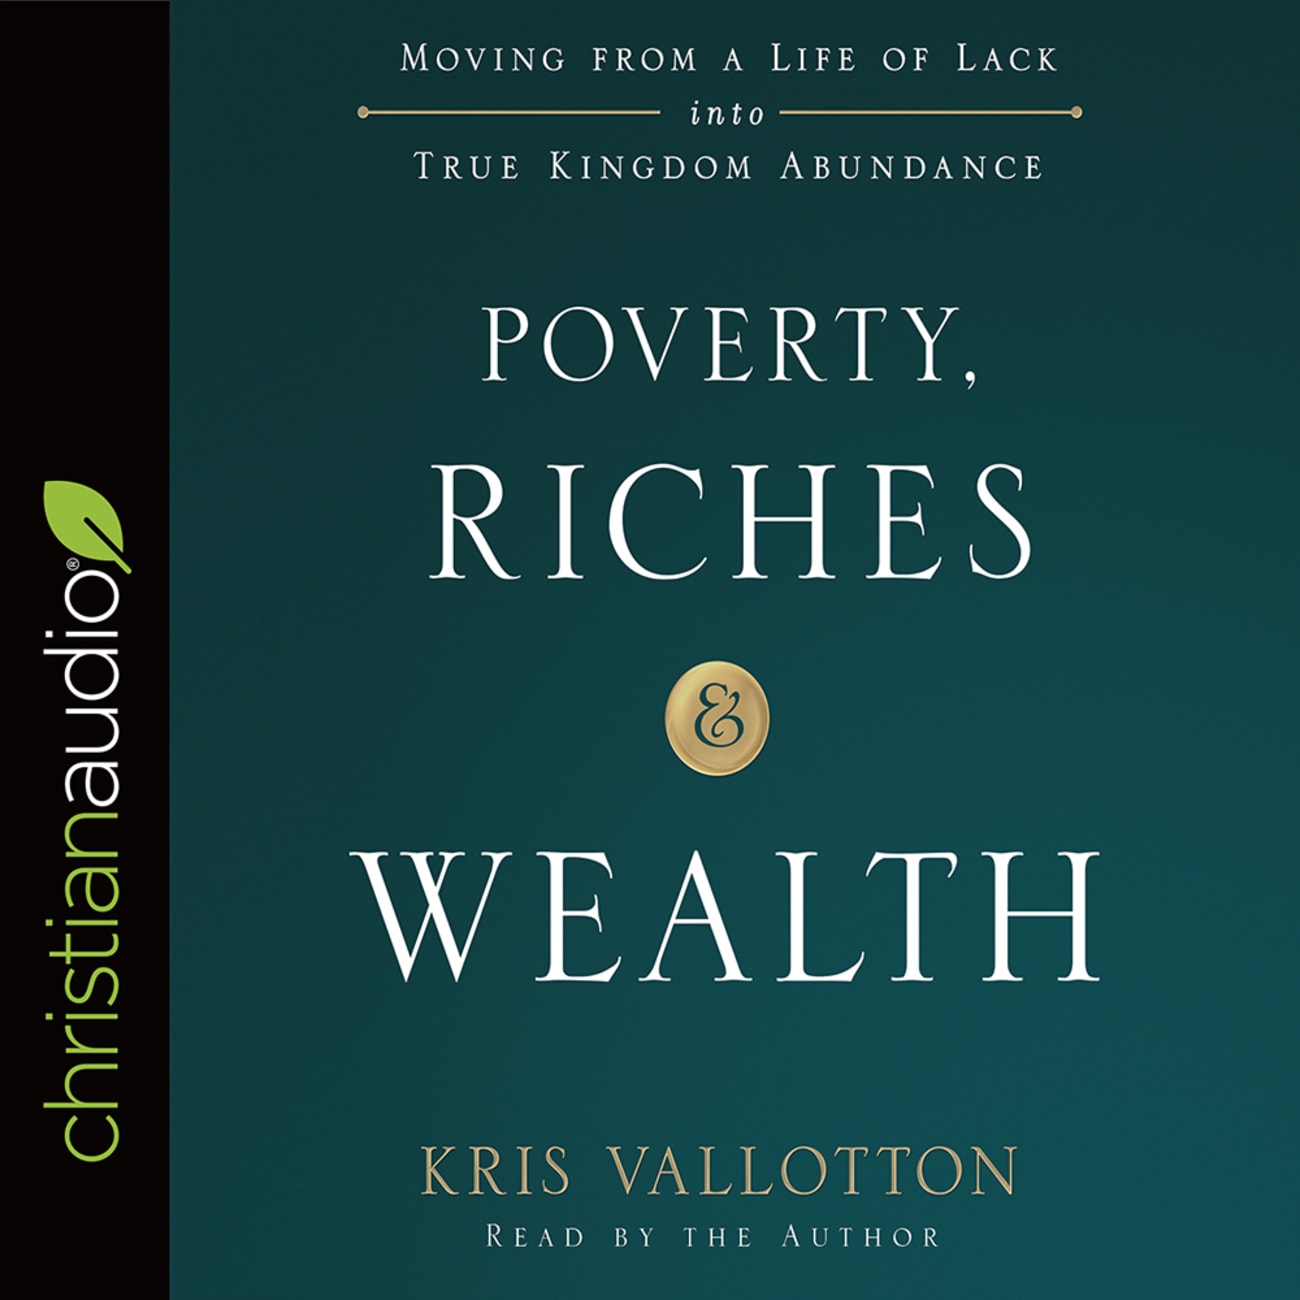 Poverty, Riches and Wealth: Moving From a Life of Lack Into True Kingdom Abundance (Unabridged, 4 Cds) Compact Disc